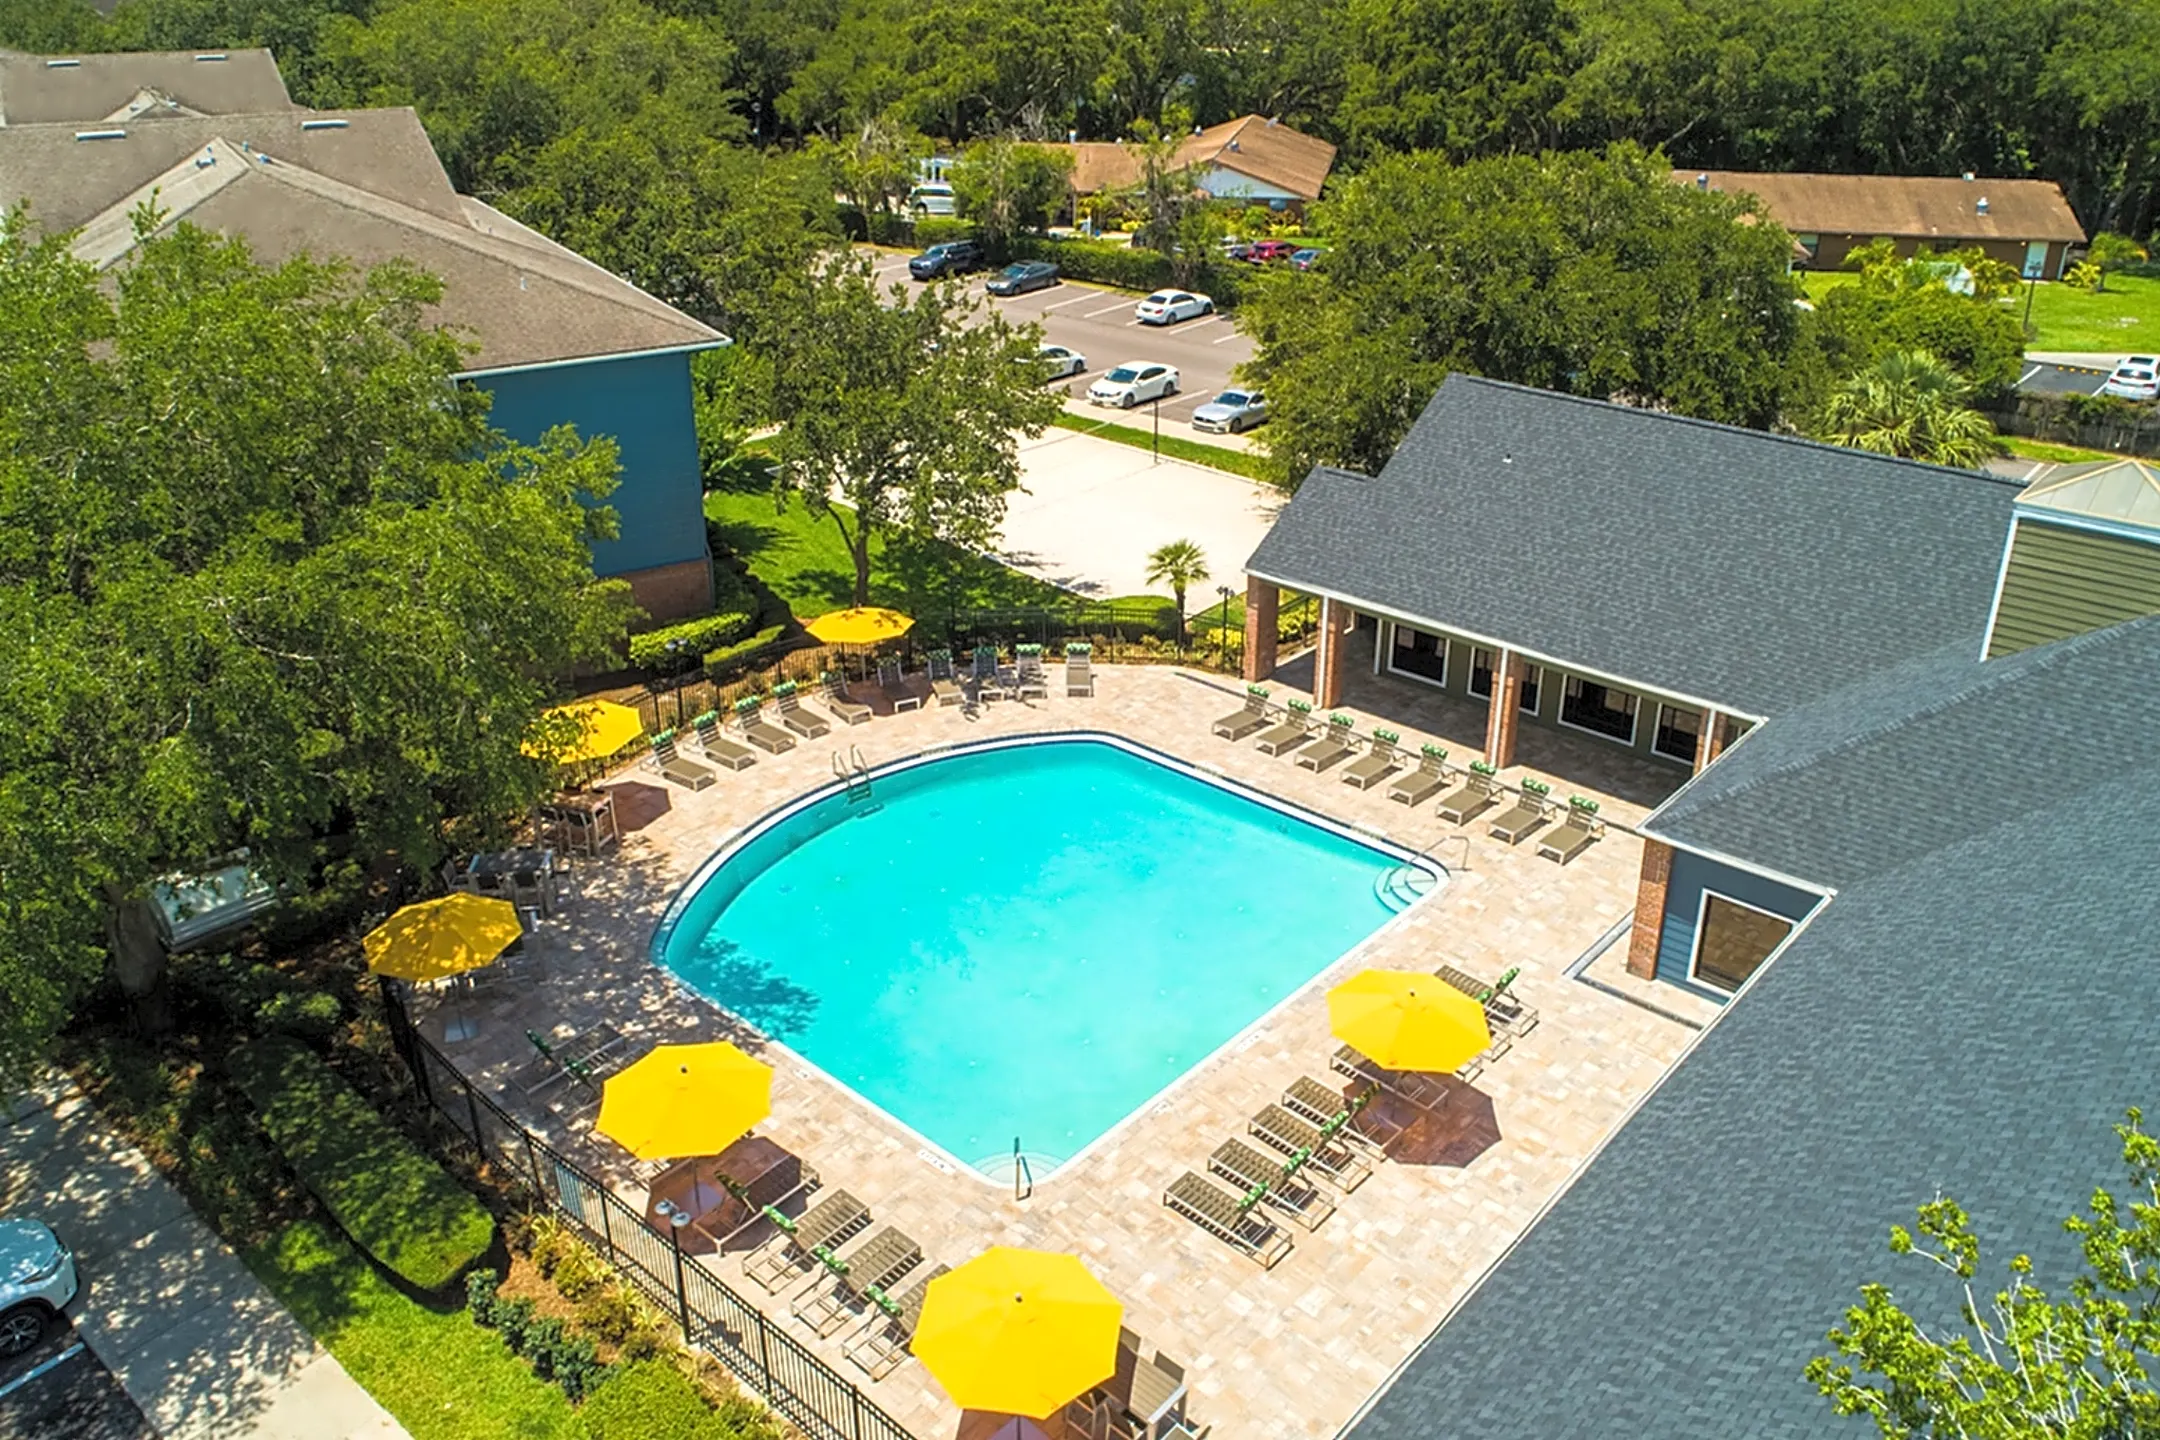 Pool - Reflections Apartments - Per Bed Lease - Tampa, FL